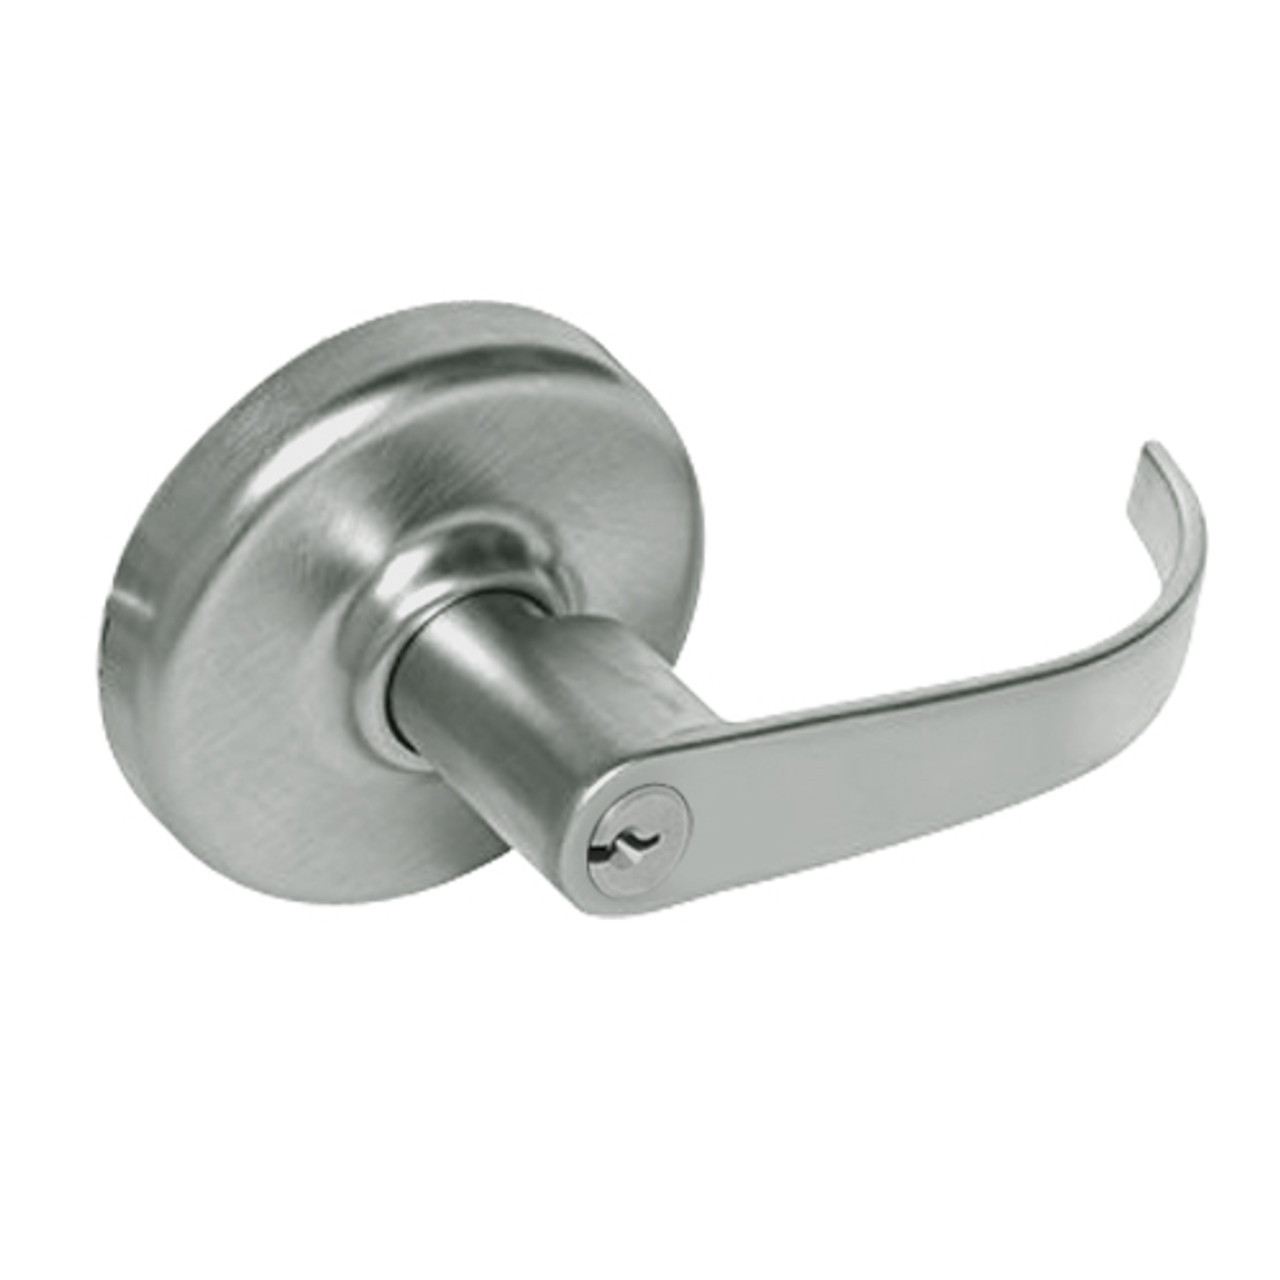 CL3375-PZD-619 Corbin CL3300 Series Extra Heavy Duty Corridor/Dormitory Cylindrical Locksets with Princeton Lever in Satin Nickel Plated Finish